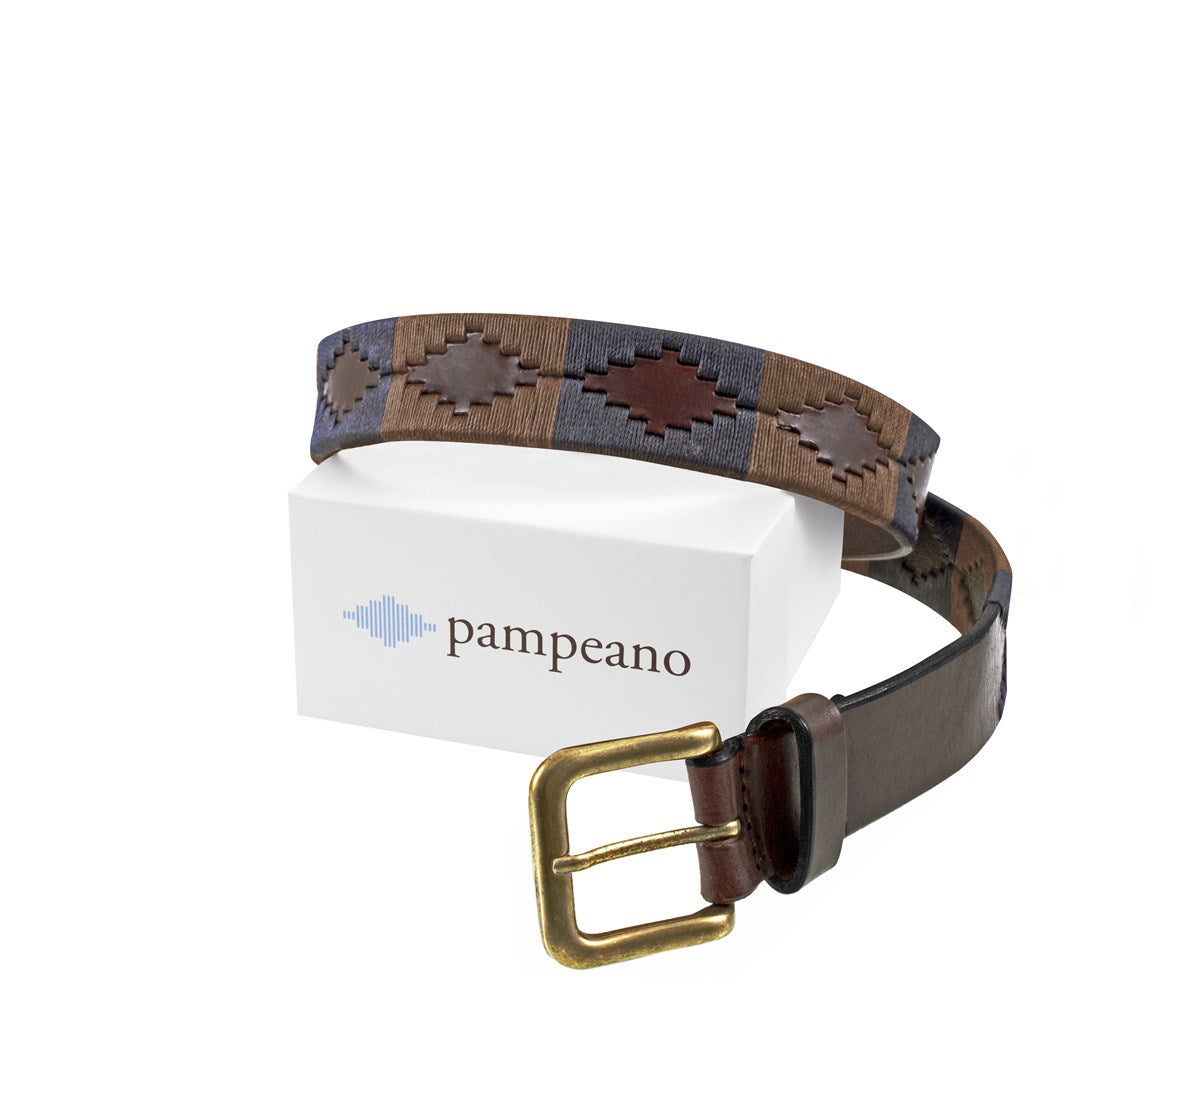 Pampeano Jefe Navy and Brown Polo Leather Belt